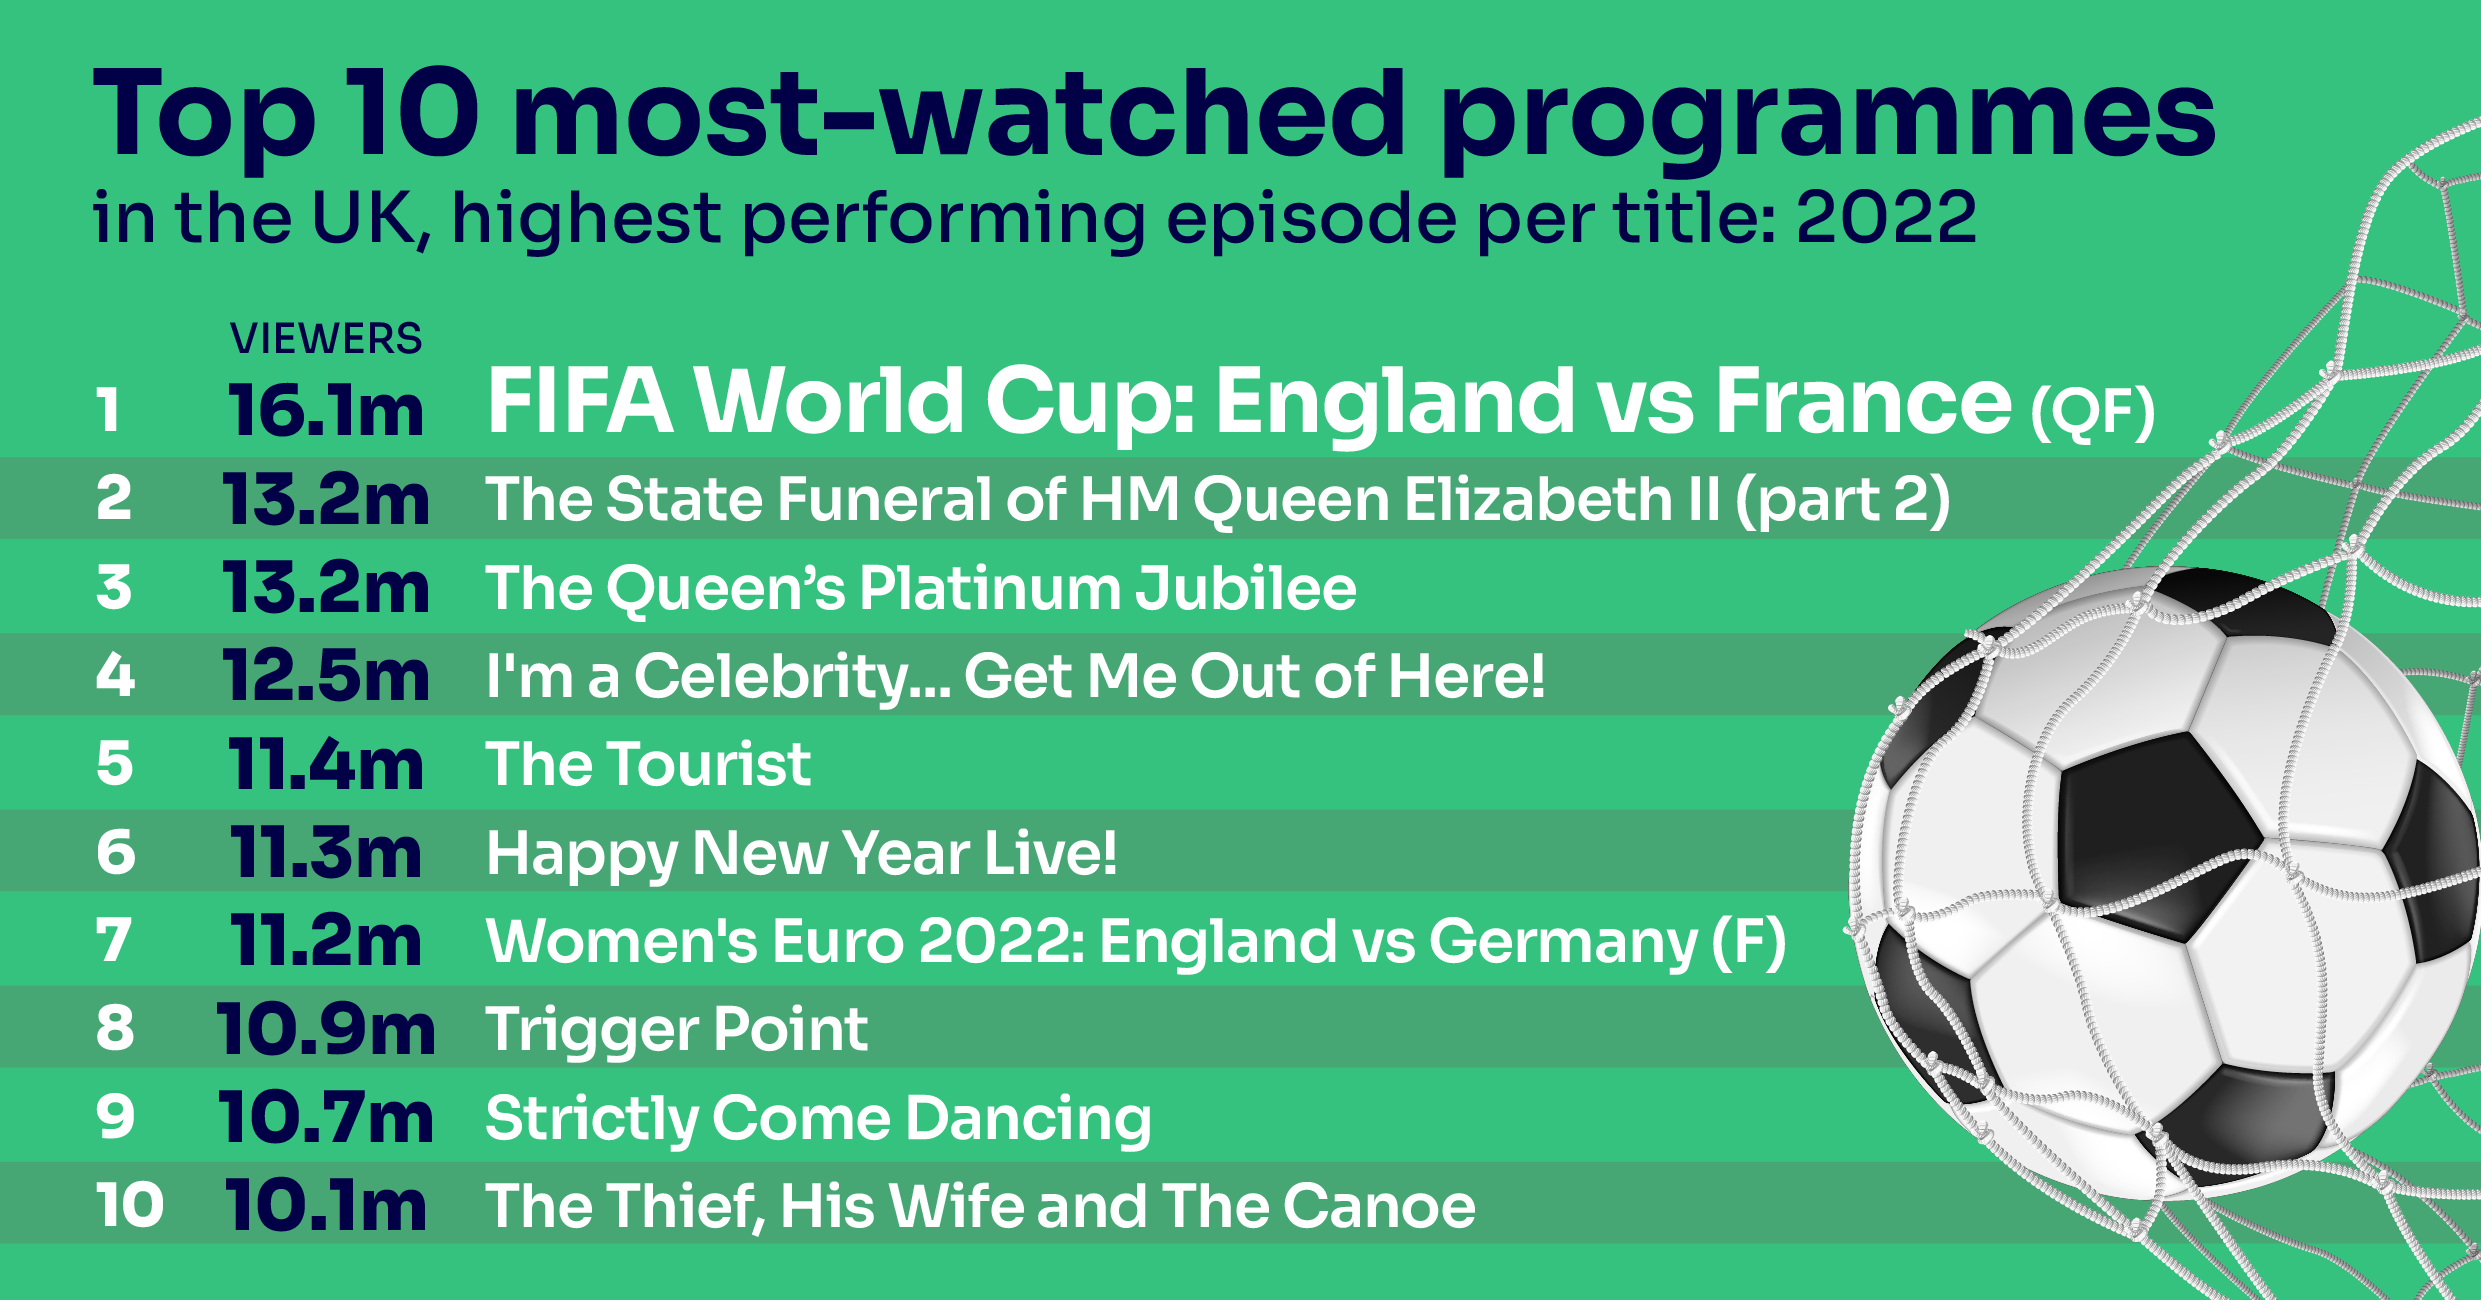 Top 10 most watched programmes